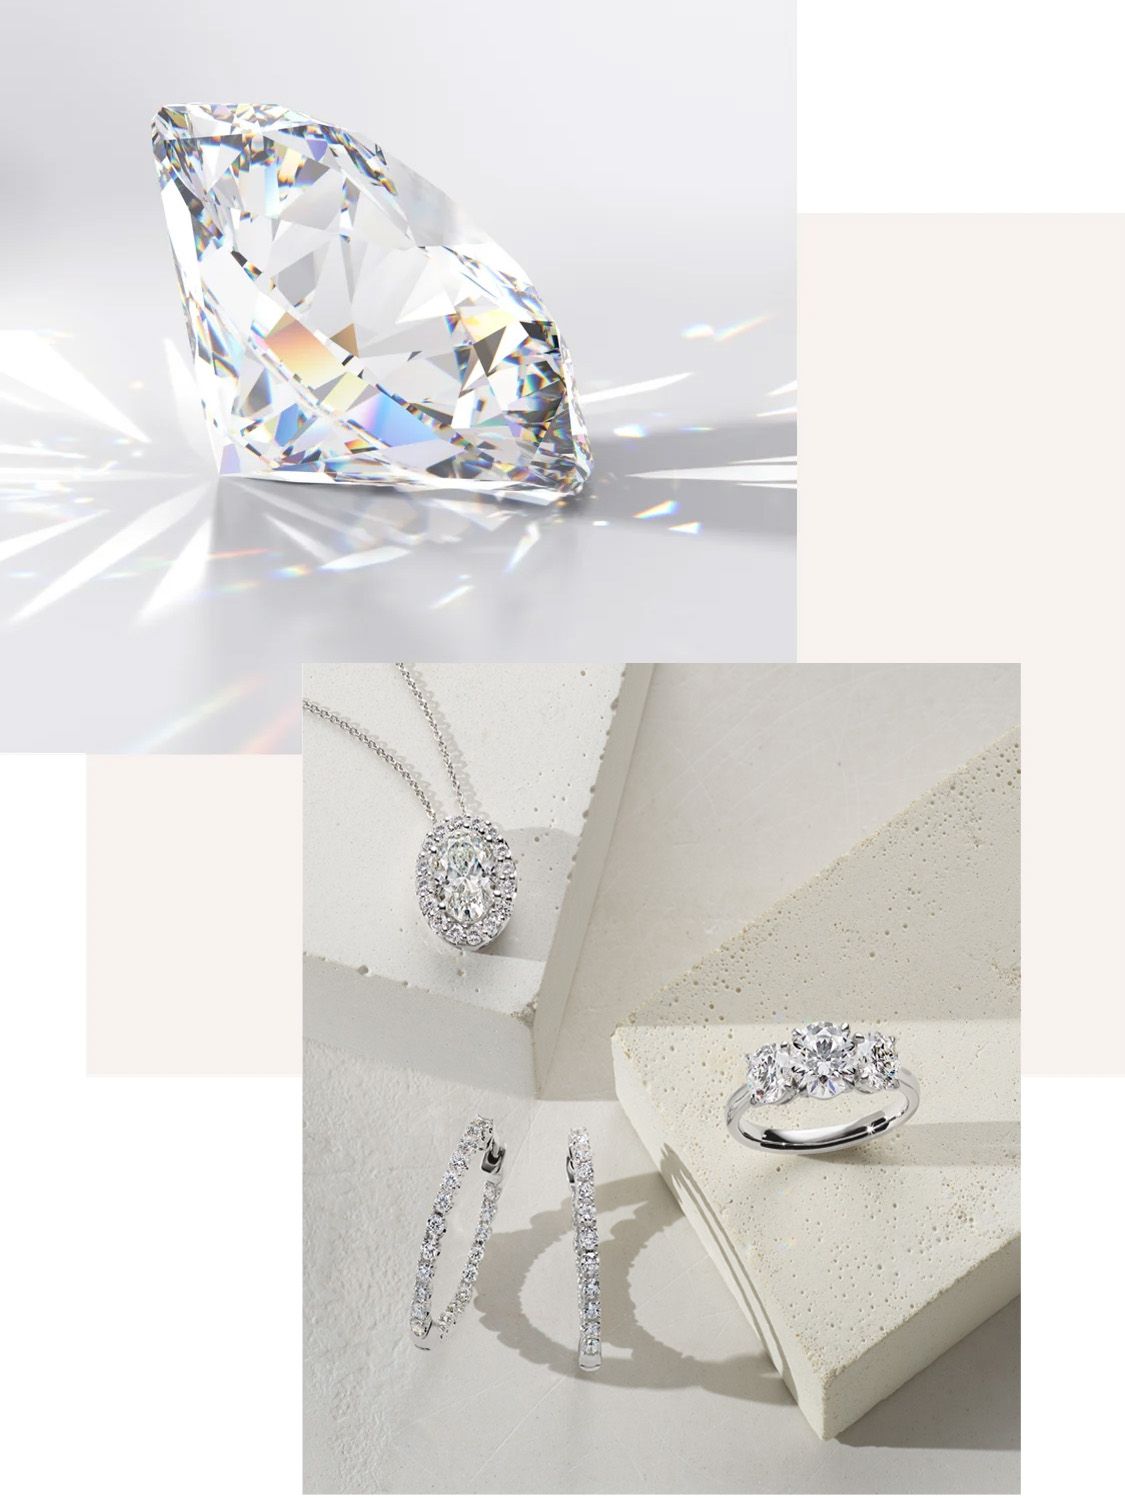 Images of a loose lab-grown diamond and a woman wearing a diamond engagement ring